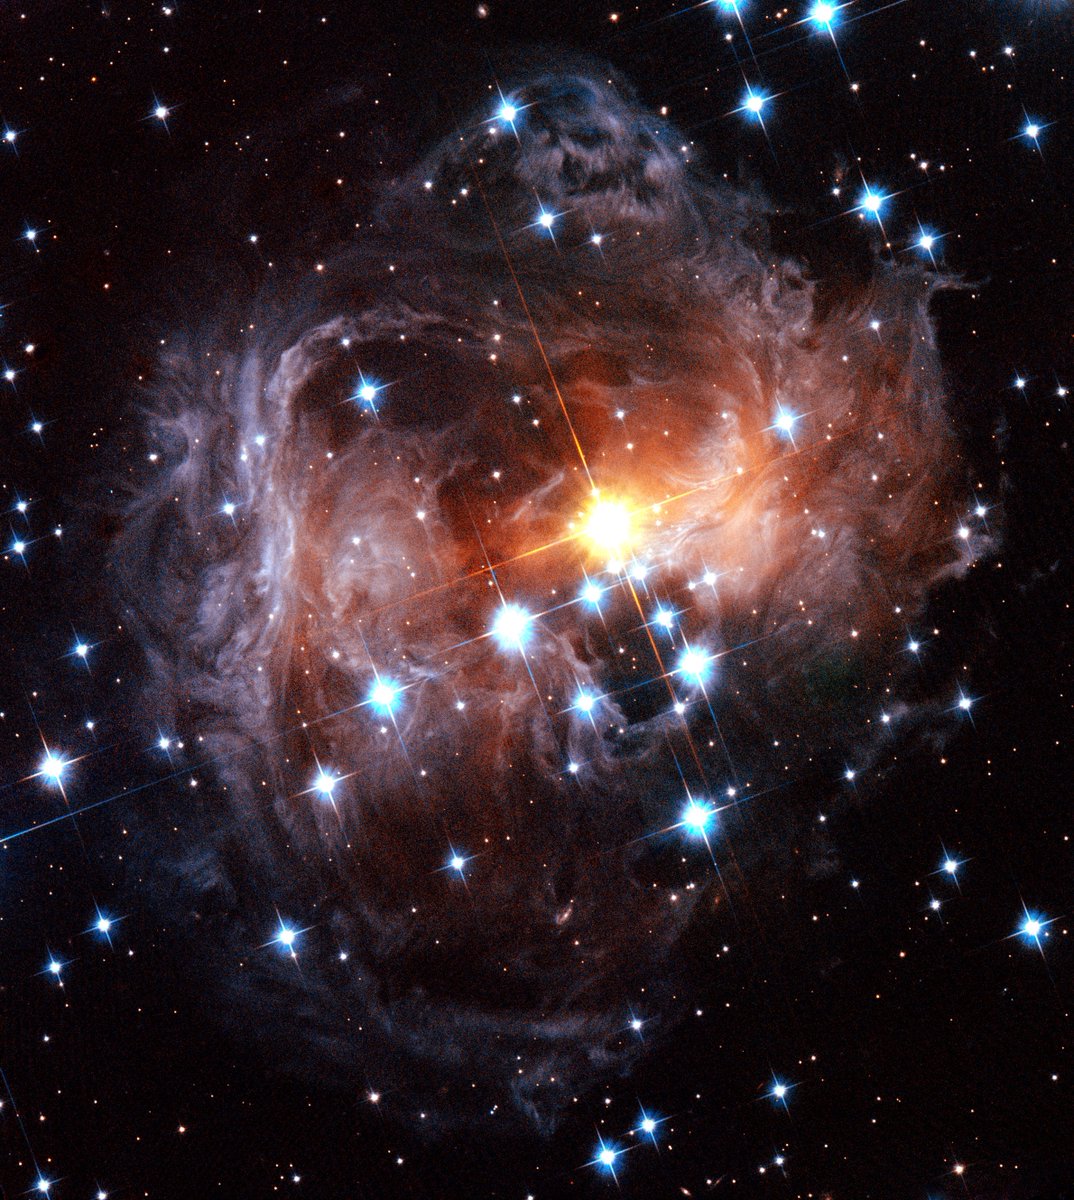 The "light echo" from the star V838 Monocerotis, which suddenly brightened in 2002. Light from the star reflects off surrounding (but distant) dust and arrives at Earth much later than the initial flare up.Image: NASA, ESA and H. Bond (STScI)